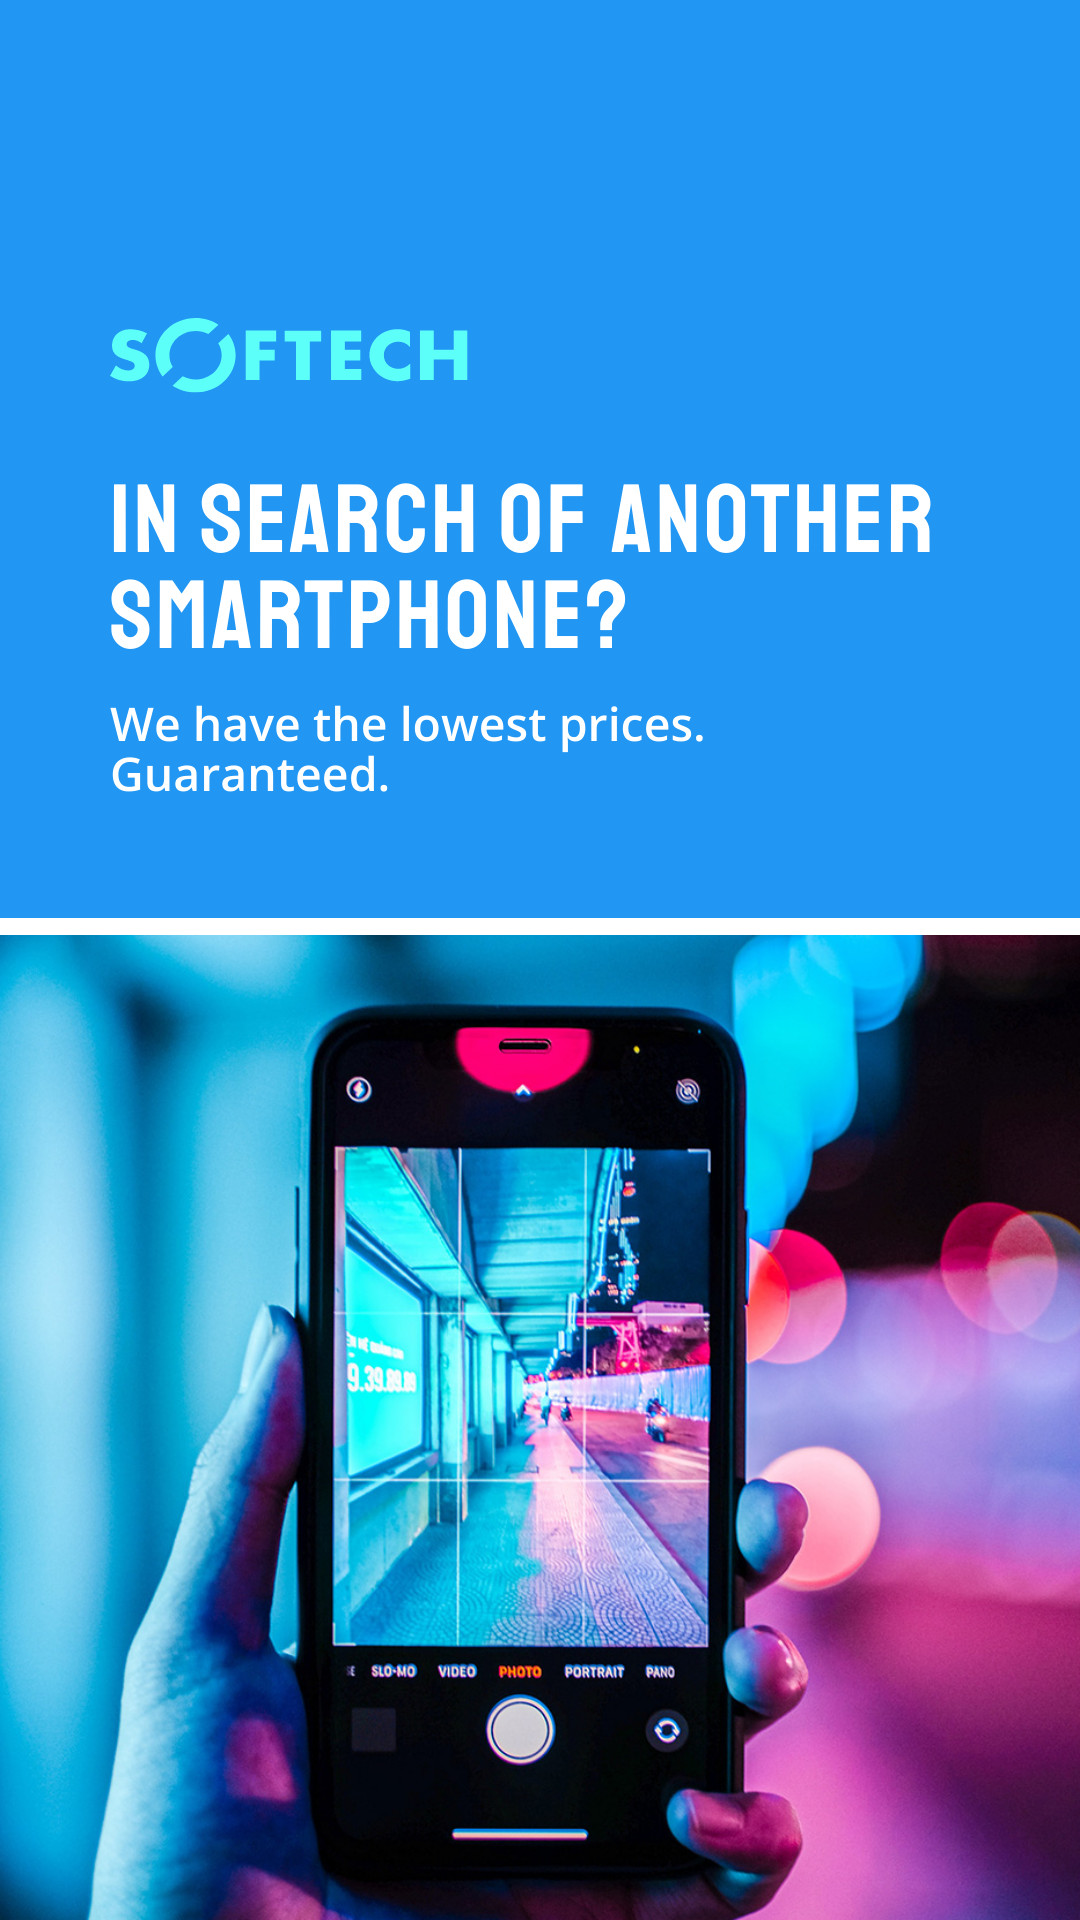 Smartphone for the Lowest Prices